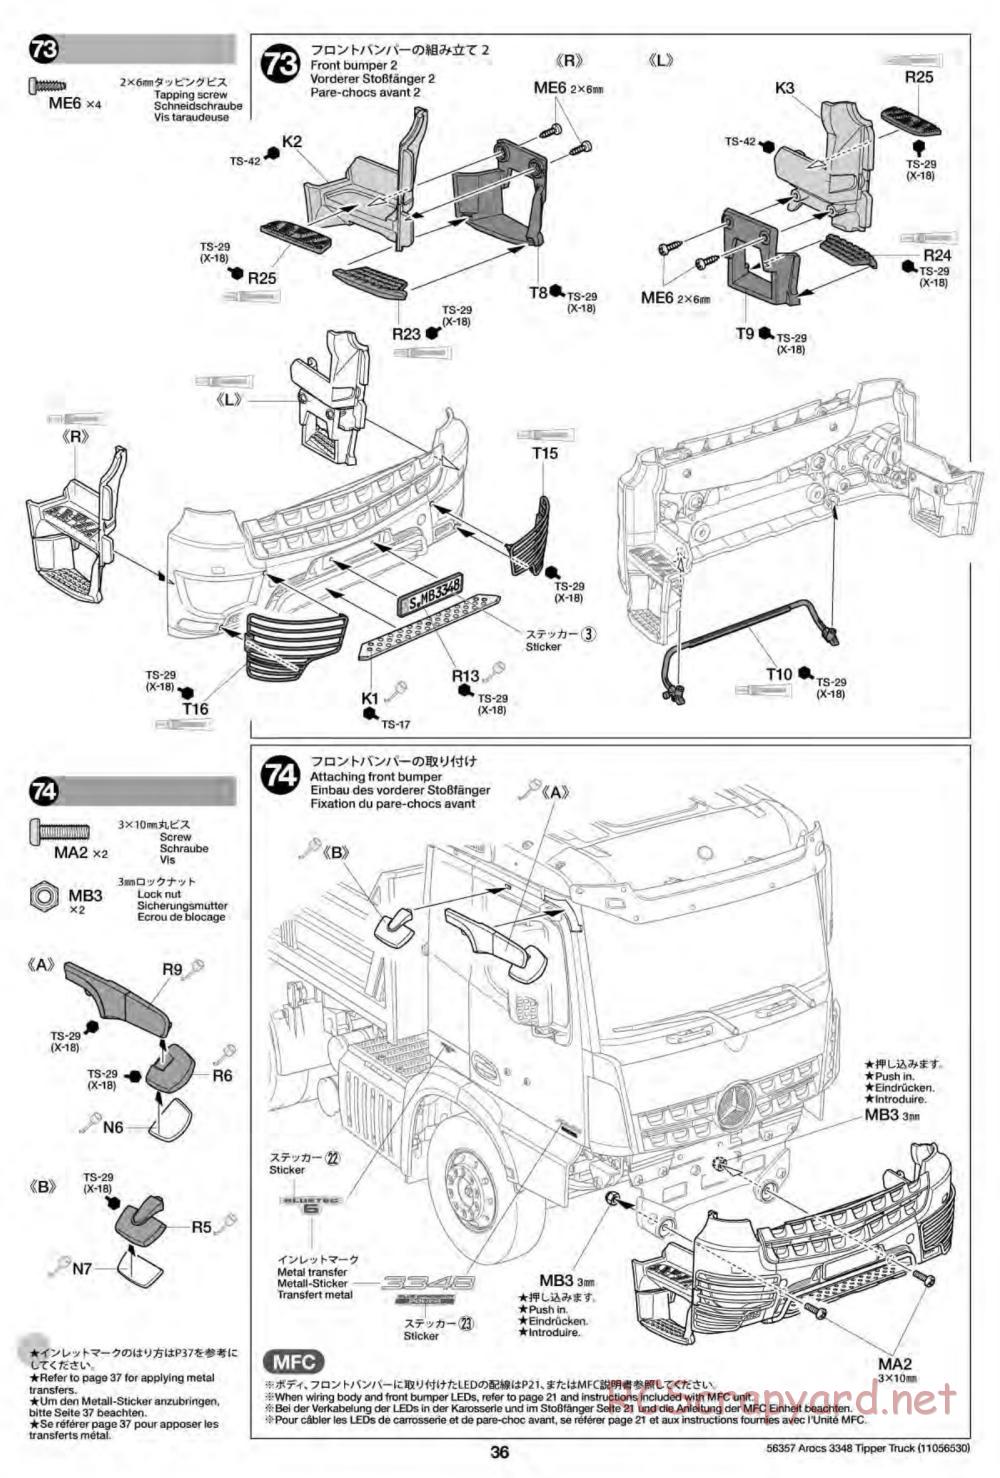 Tamiya - Mercedes-Benz Arocs 3348 6x4 Tipper Truck Chassis - Manual - Page 36